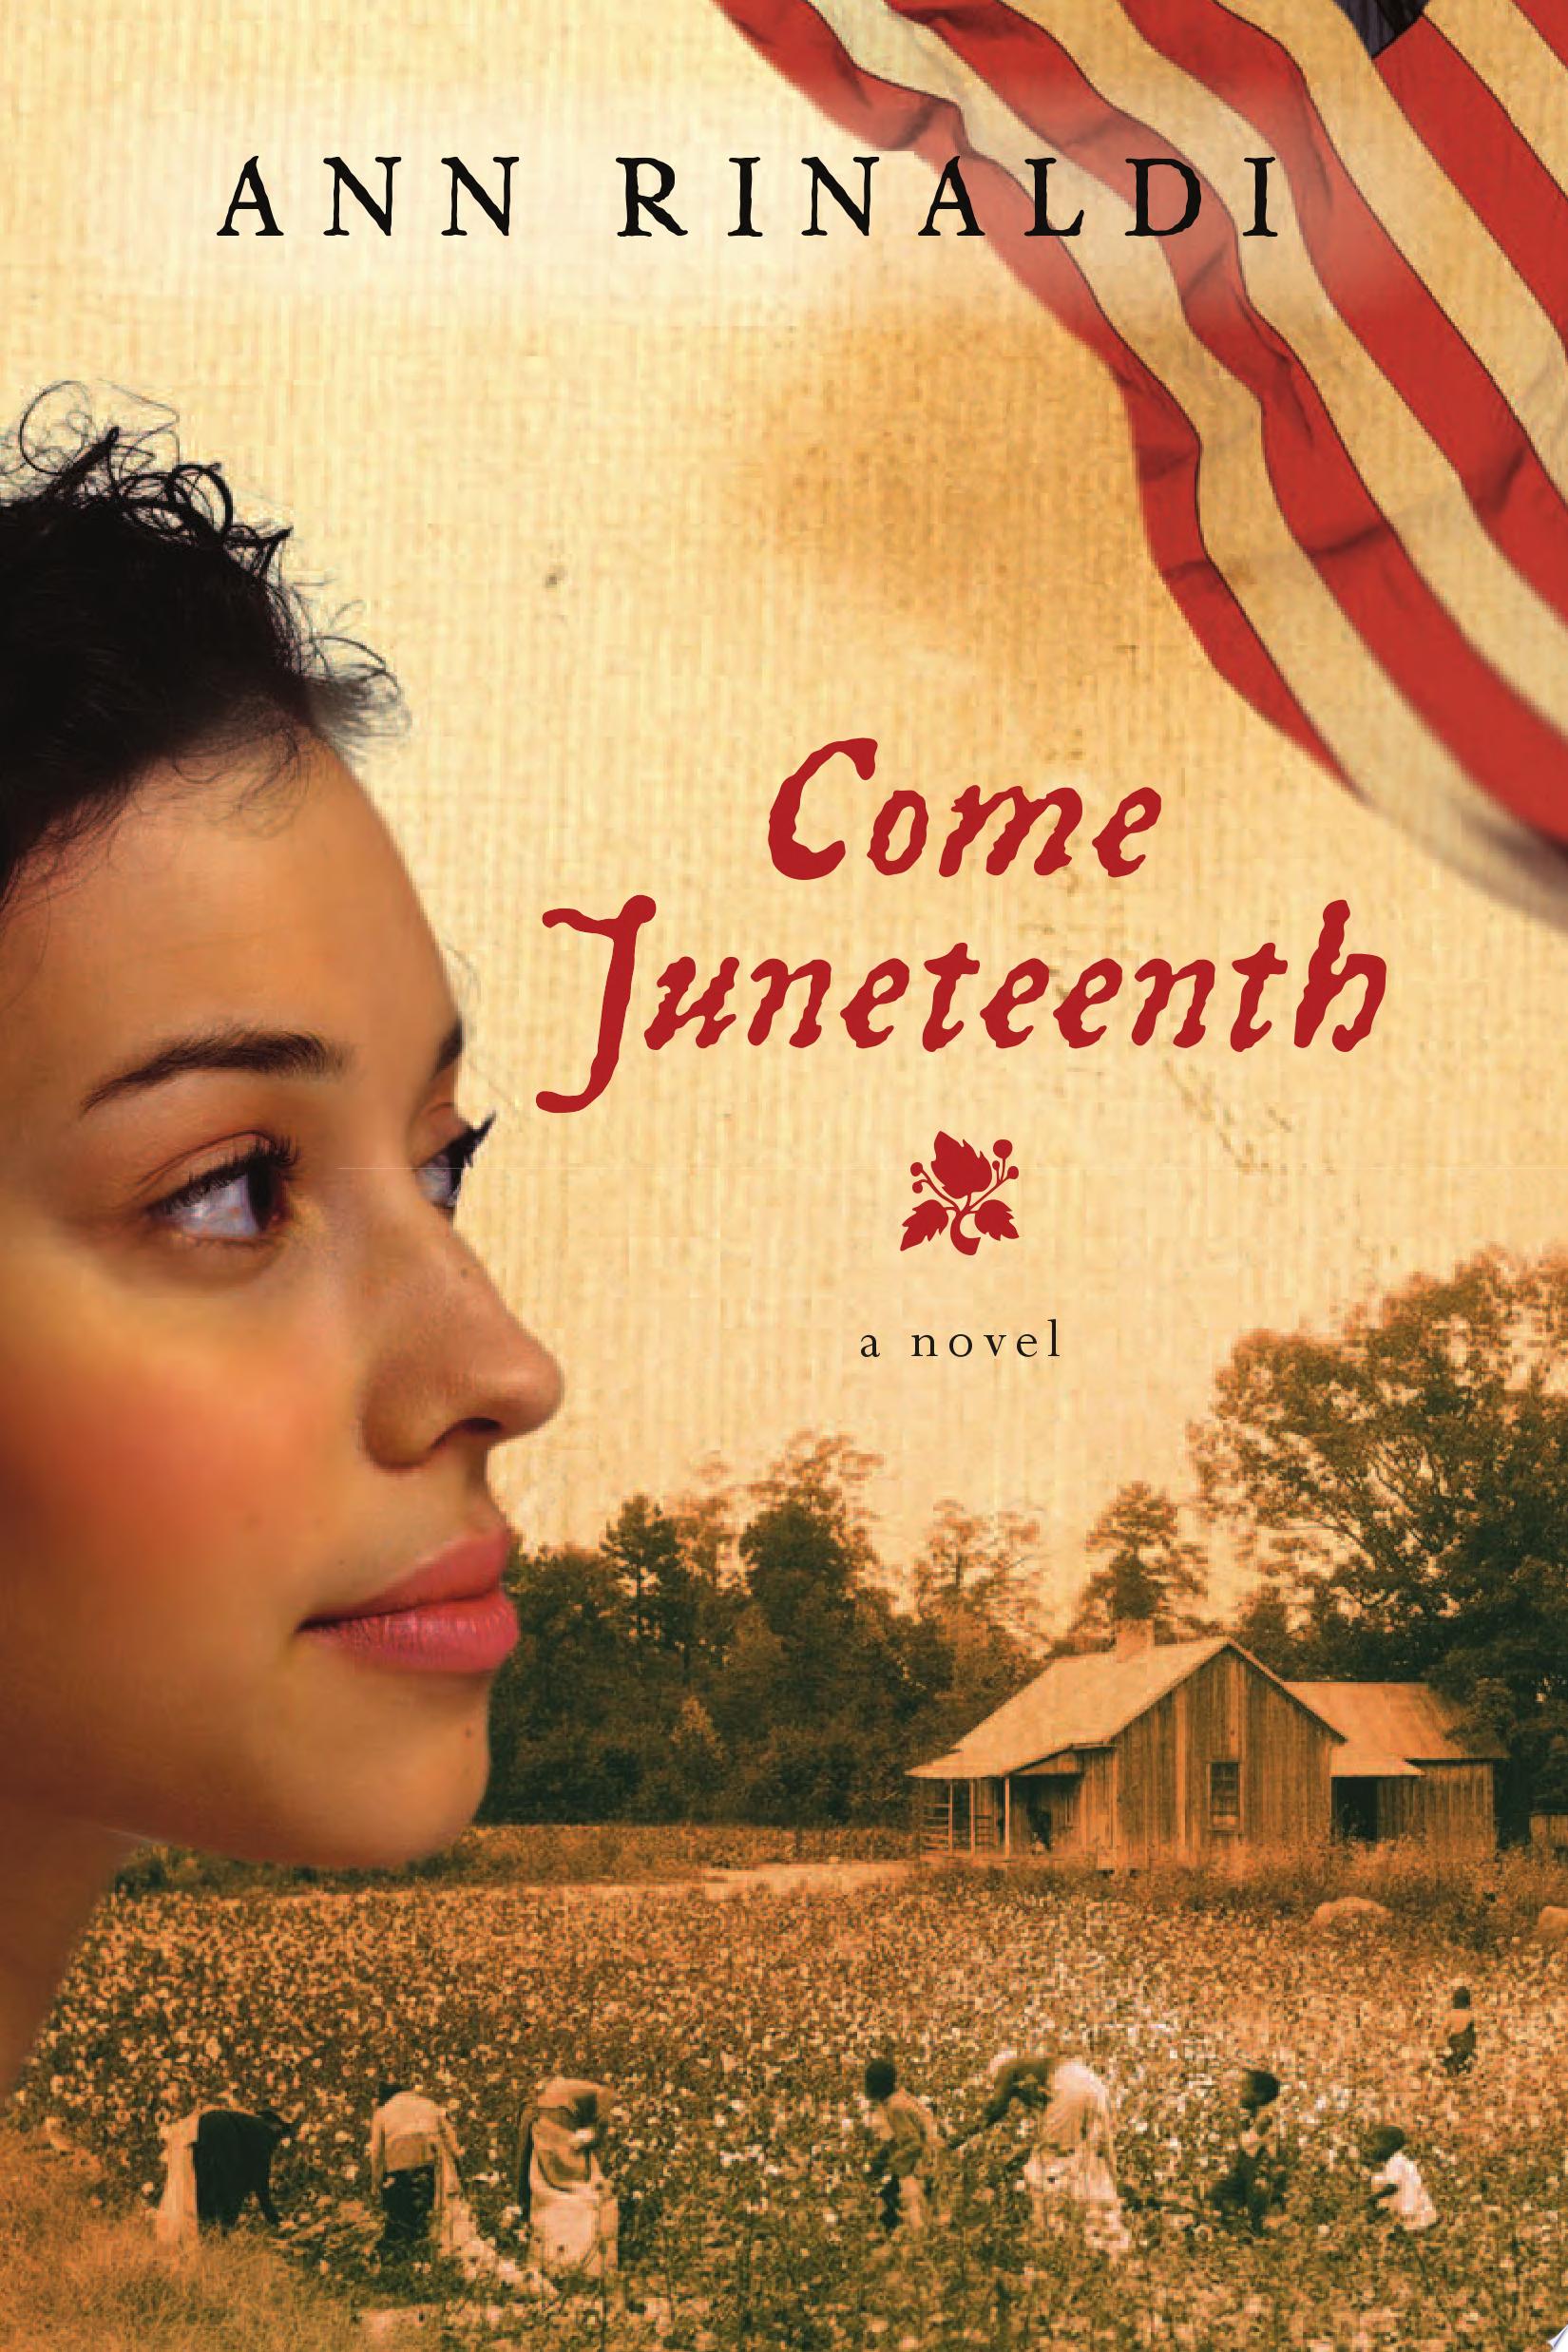 Image for "Come Juneteenth"